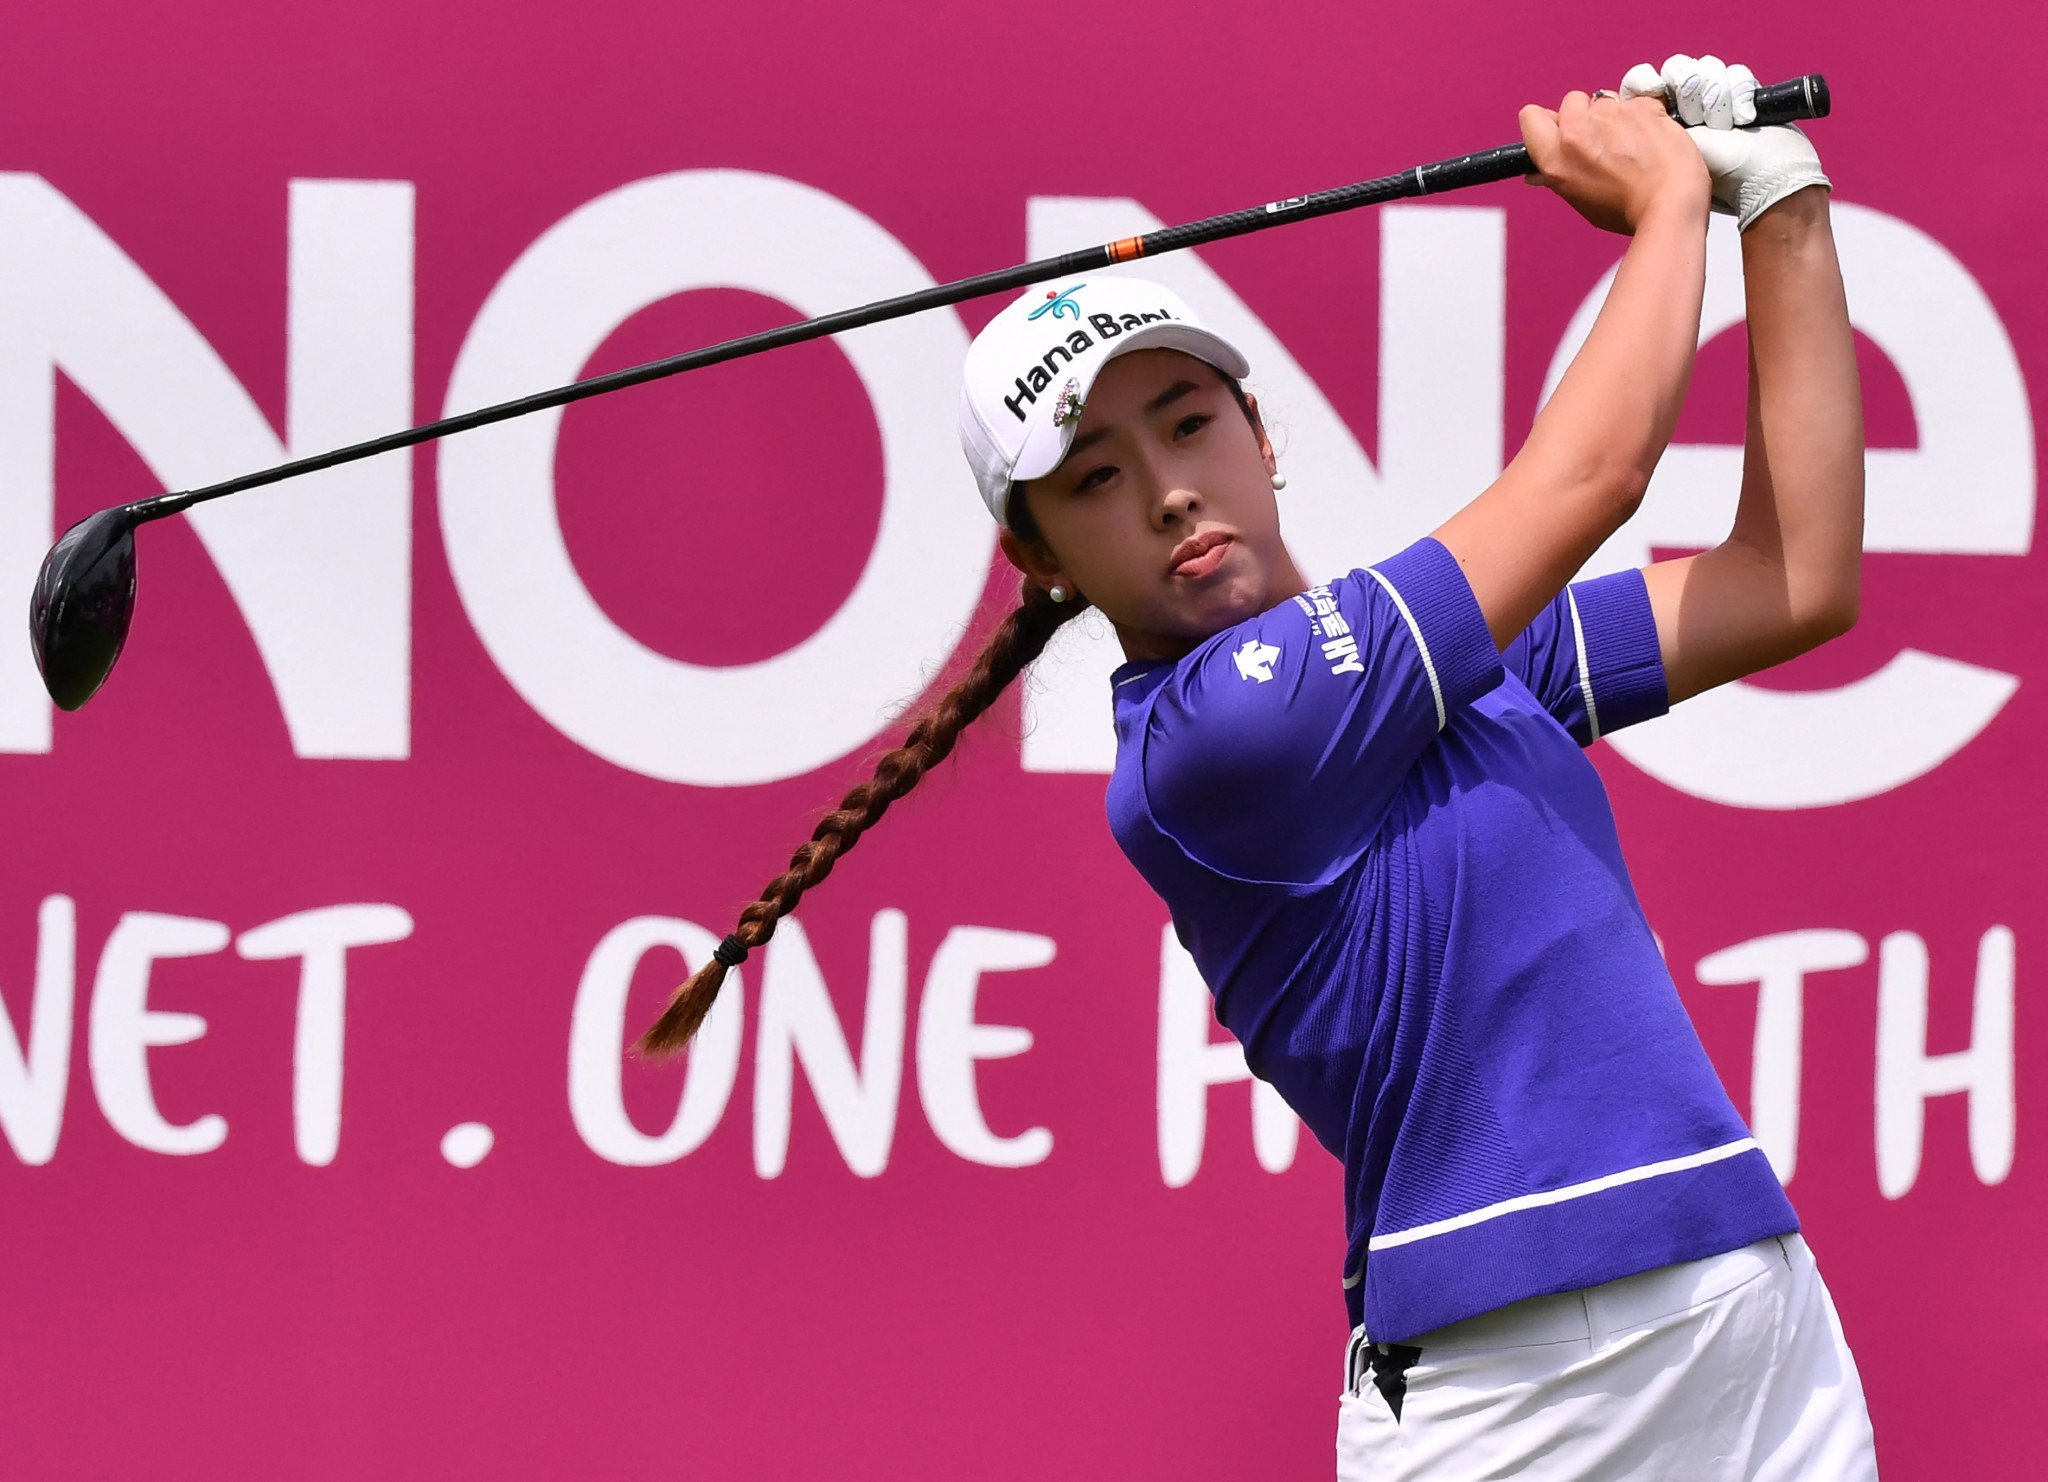 Yealimi Noh is Lee6's closest challenger heading into the final round of the Evian Championship, five shots behind the leader ©Getty Images